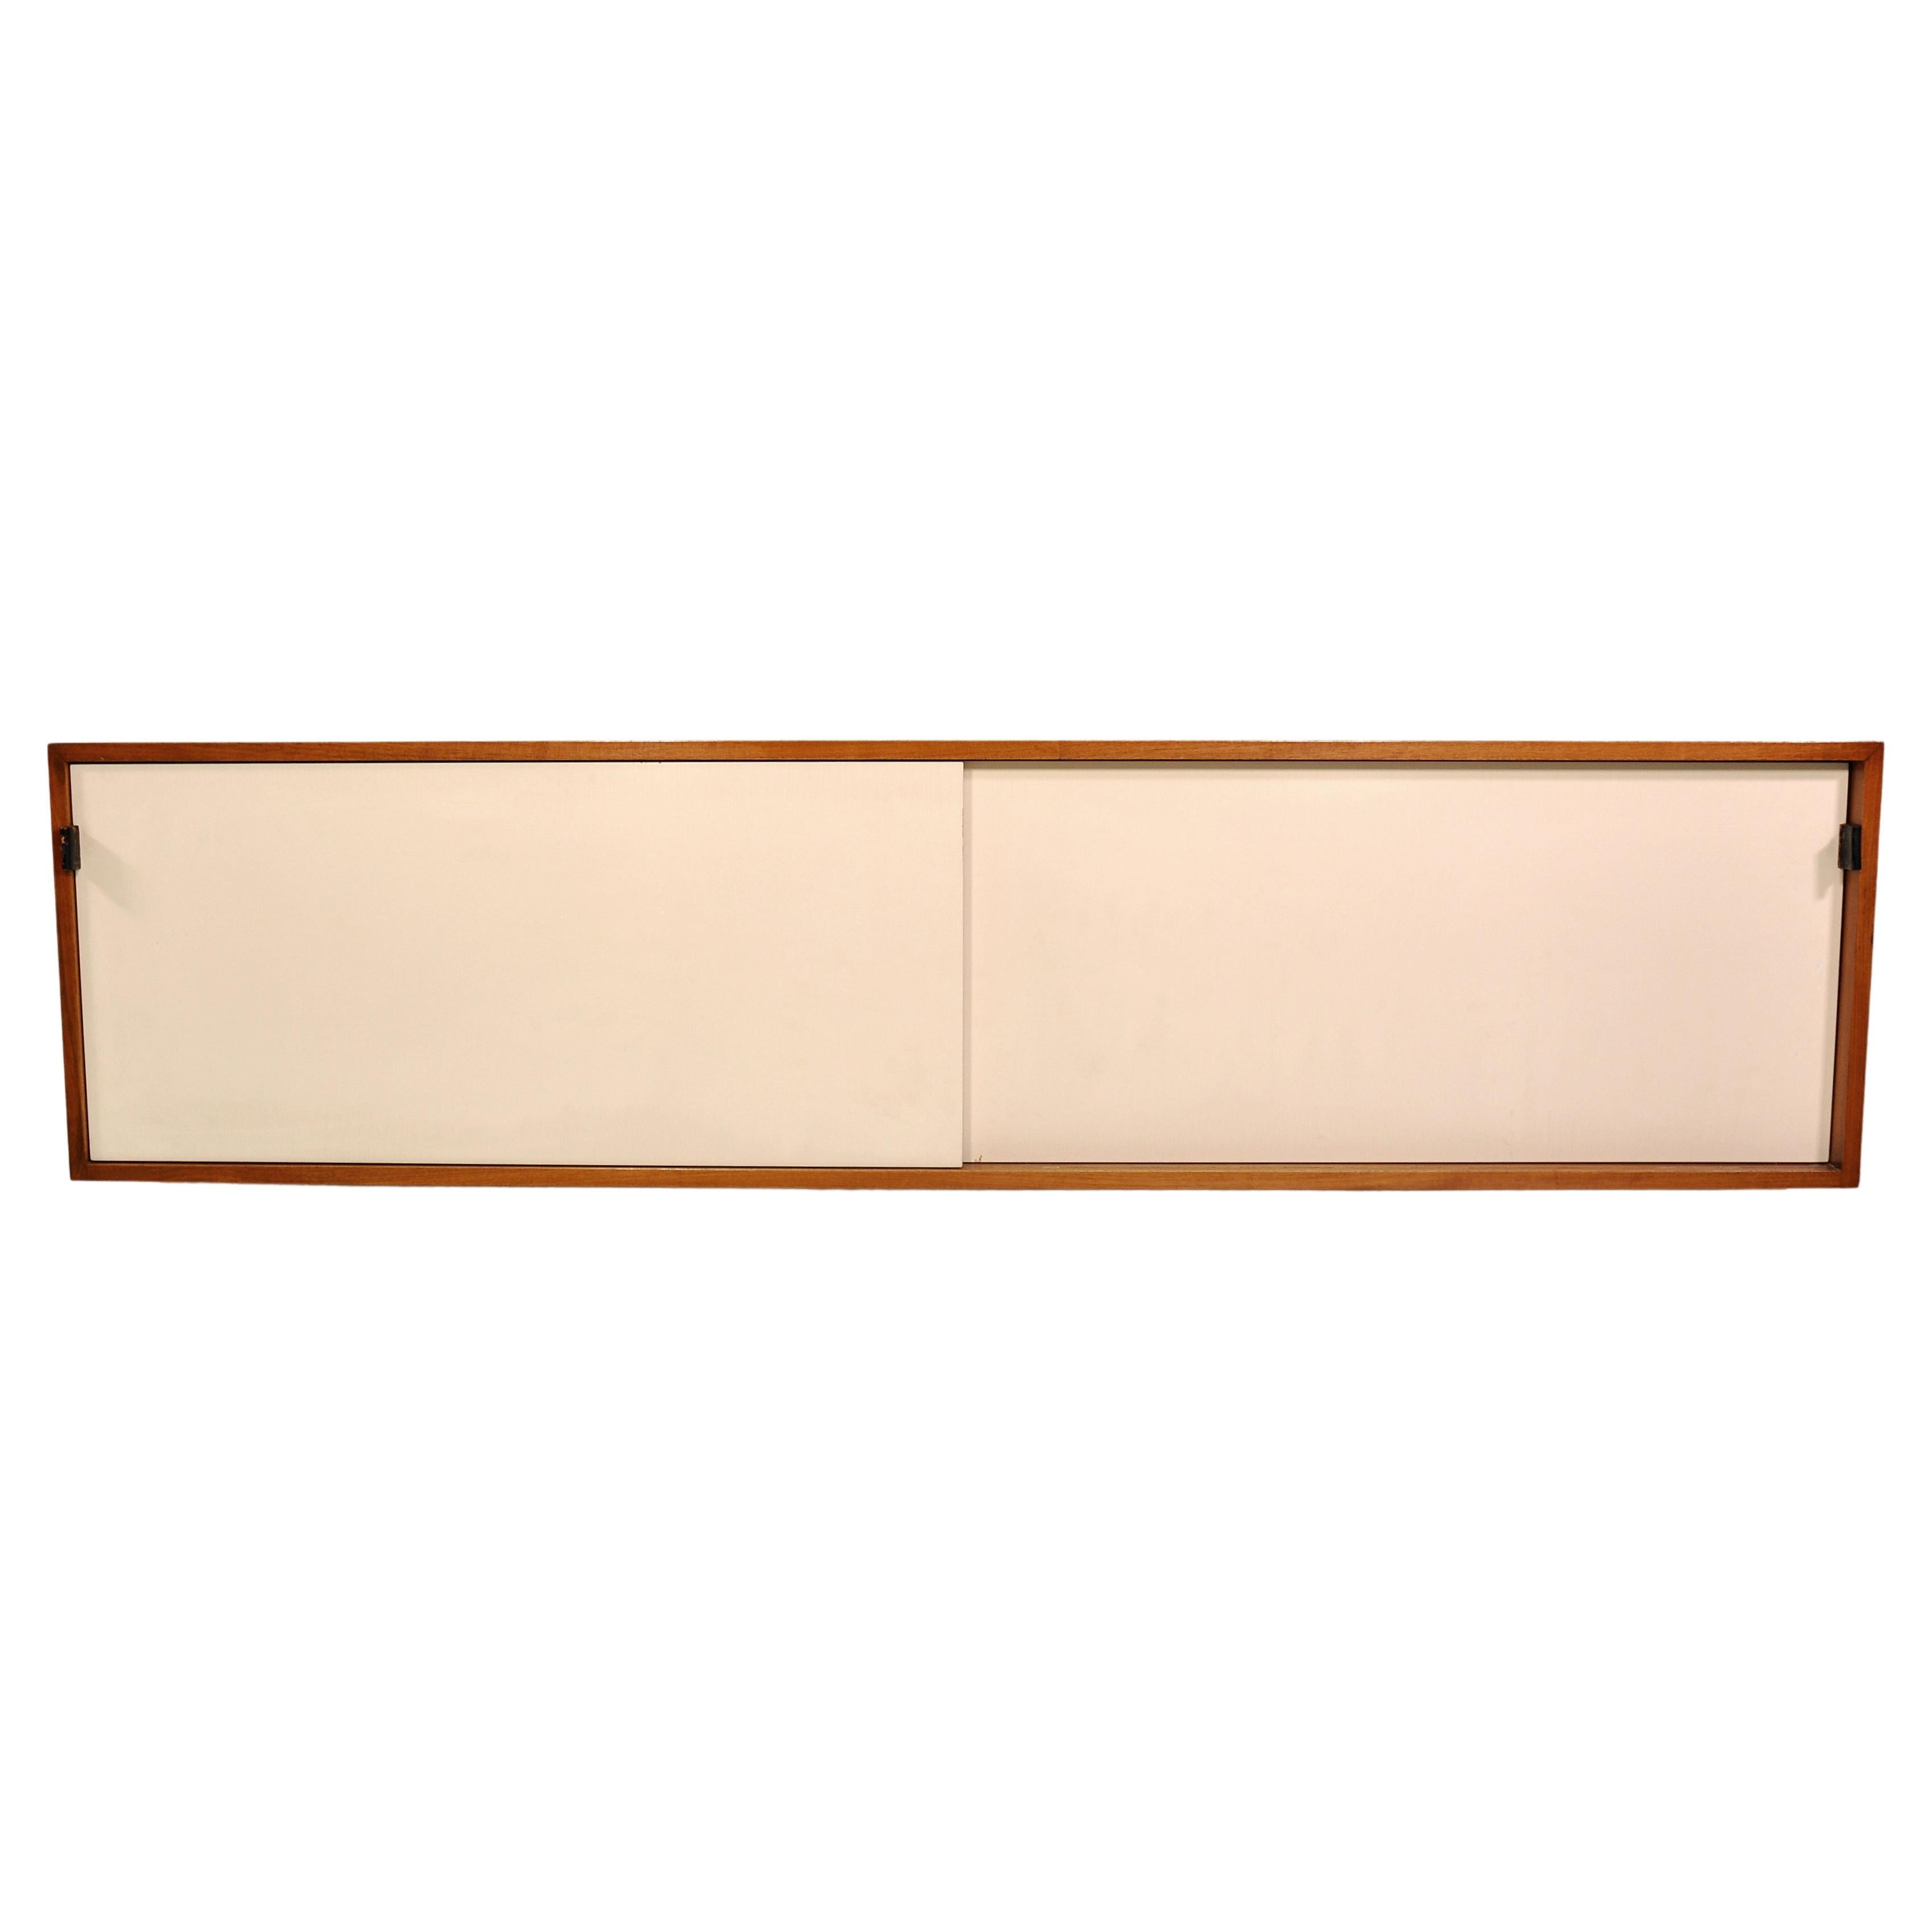 Early floating wall mounted cabinet model 123 W-1 by Florence Knoll for Knoll Inc. in walnut with lacquered wood interior. The hanging credenza features: two sliding doors; four compartments; original leather door pulls; original white lacquer